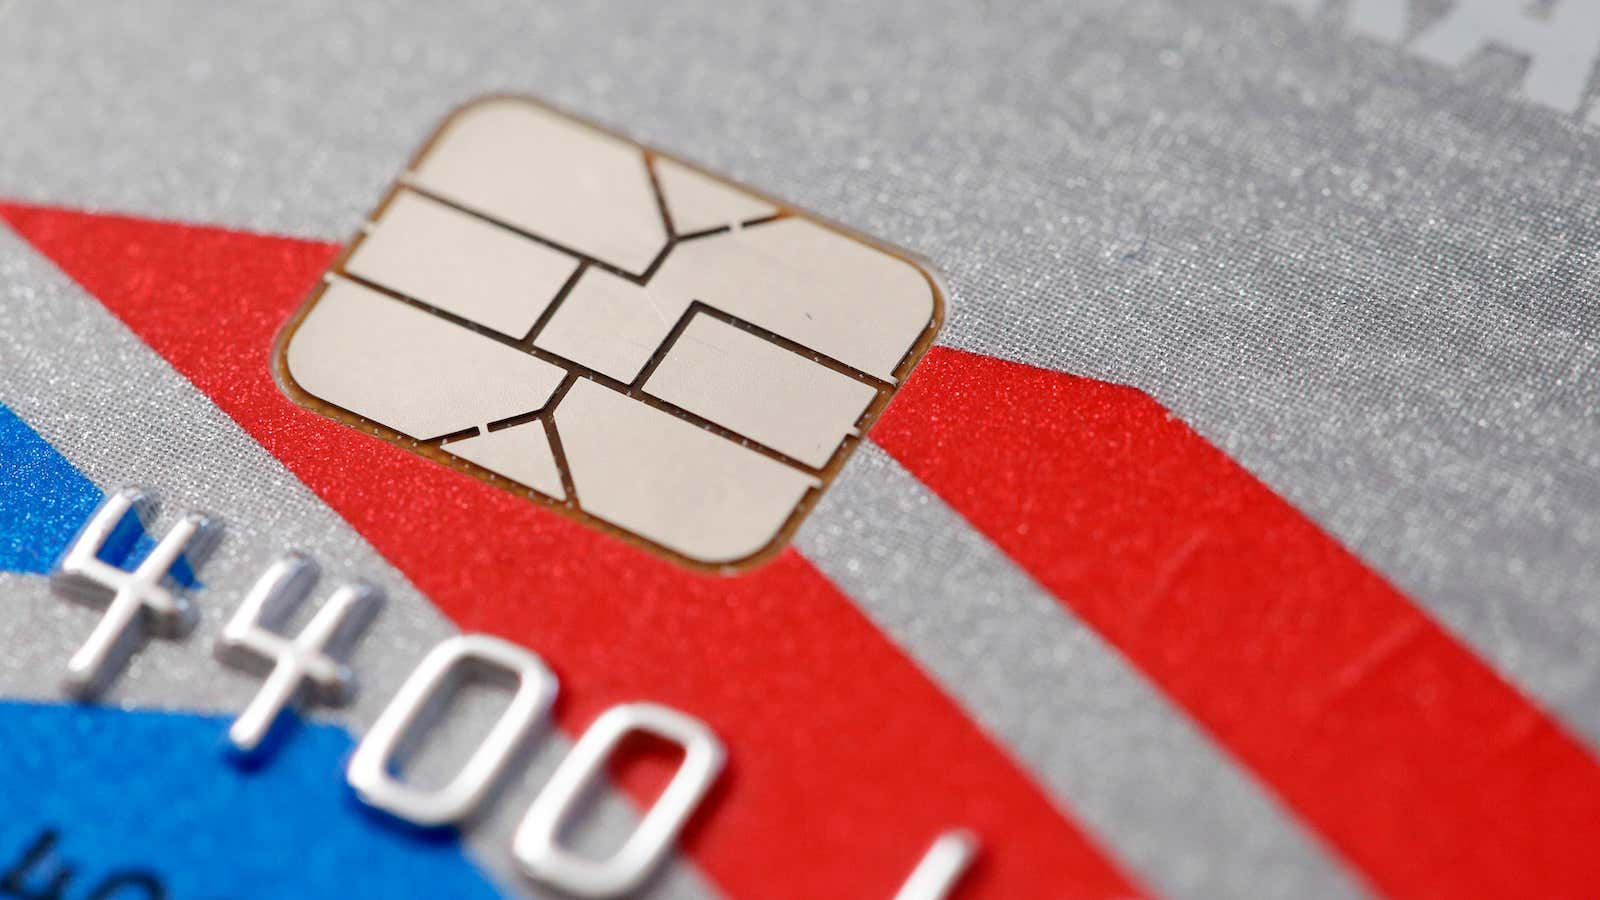 Chip cards are annoying, but online fraud is a real problem.